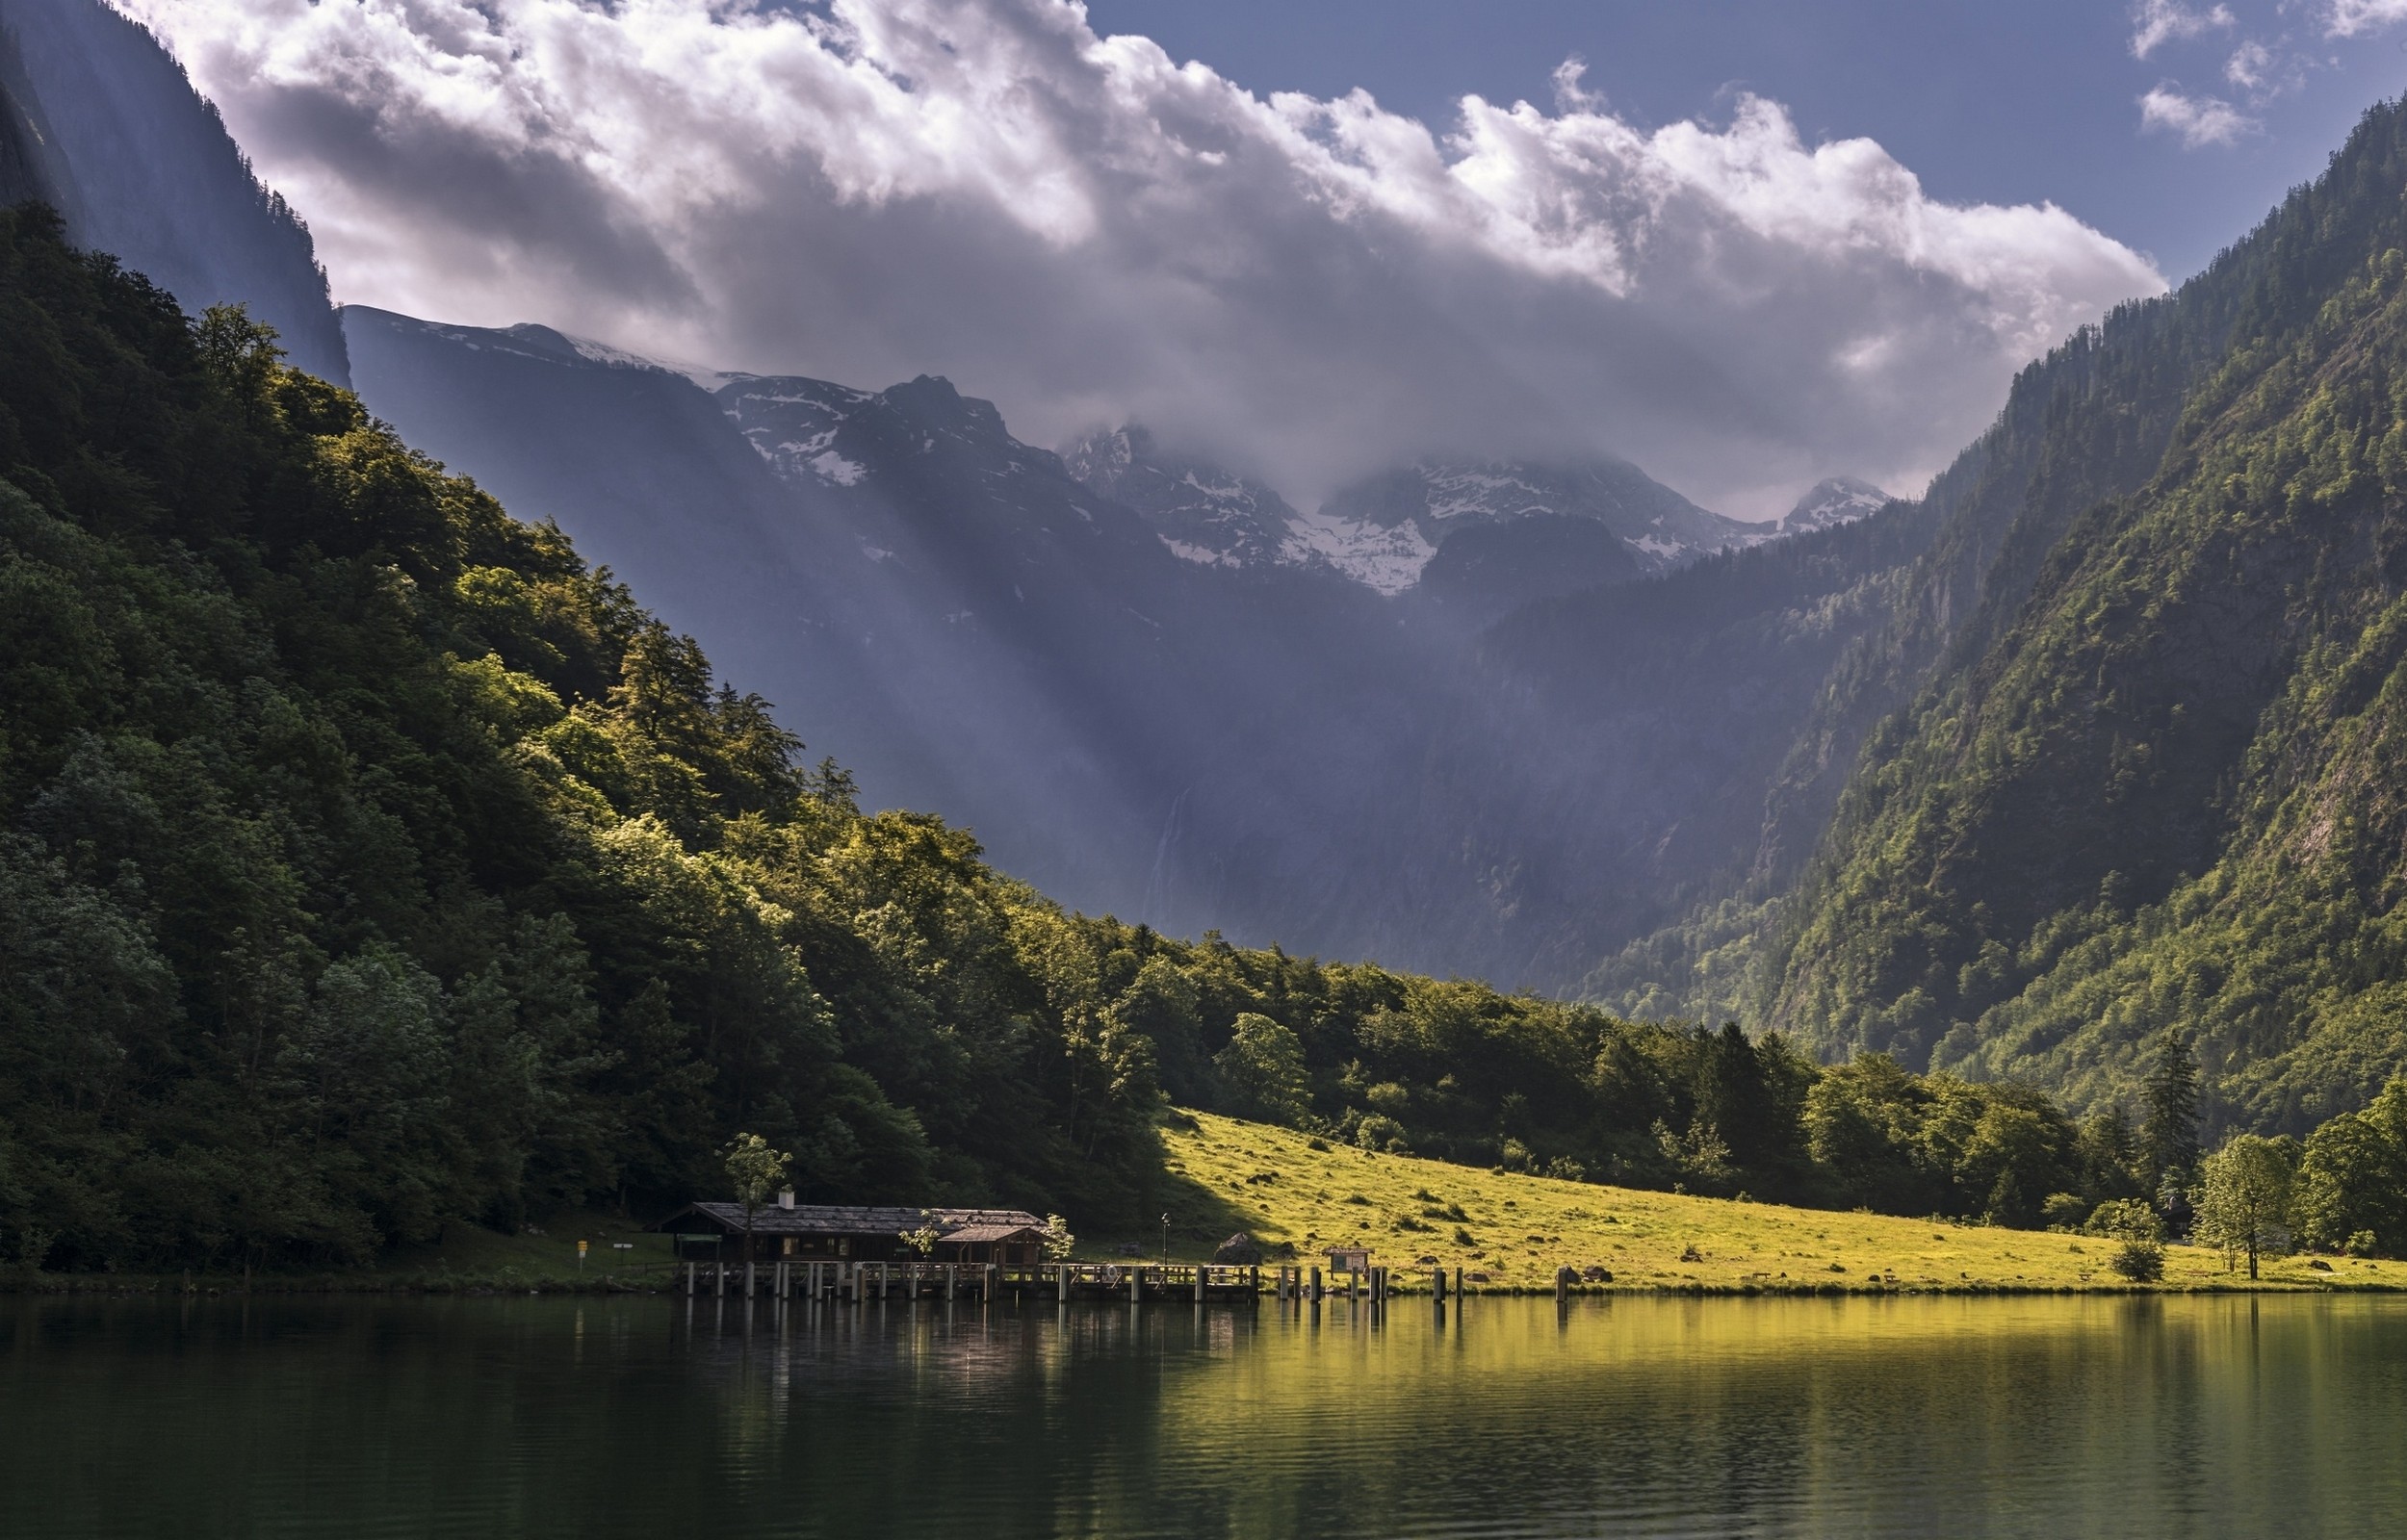 General 2500x1600 landscape nature lake house grass forest mountains clouds sun rays mist summer snowy peak green water